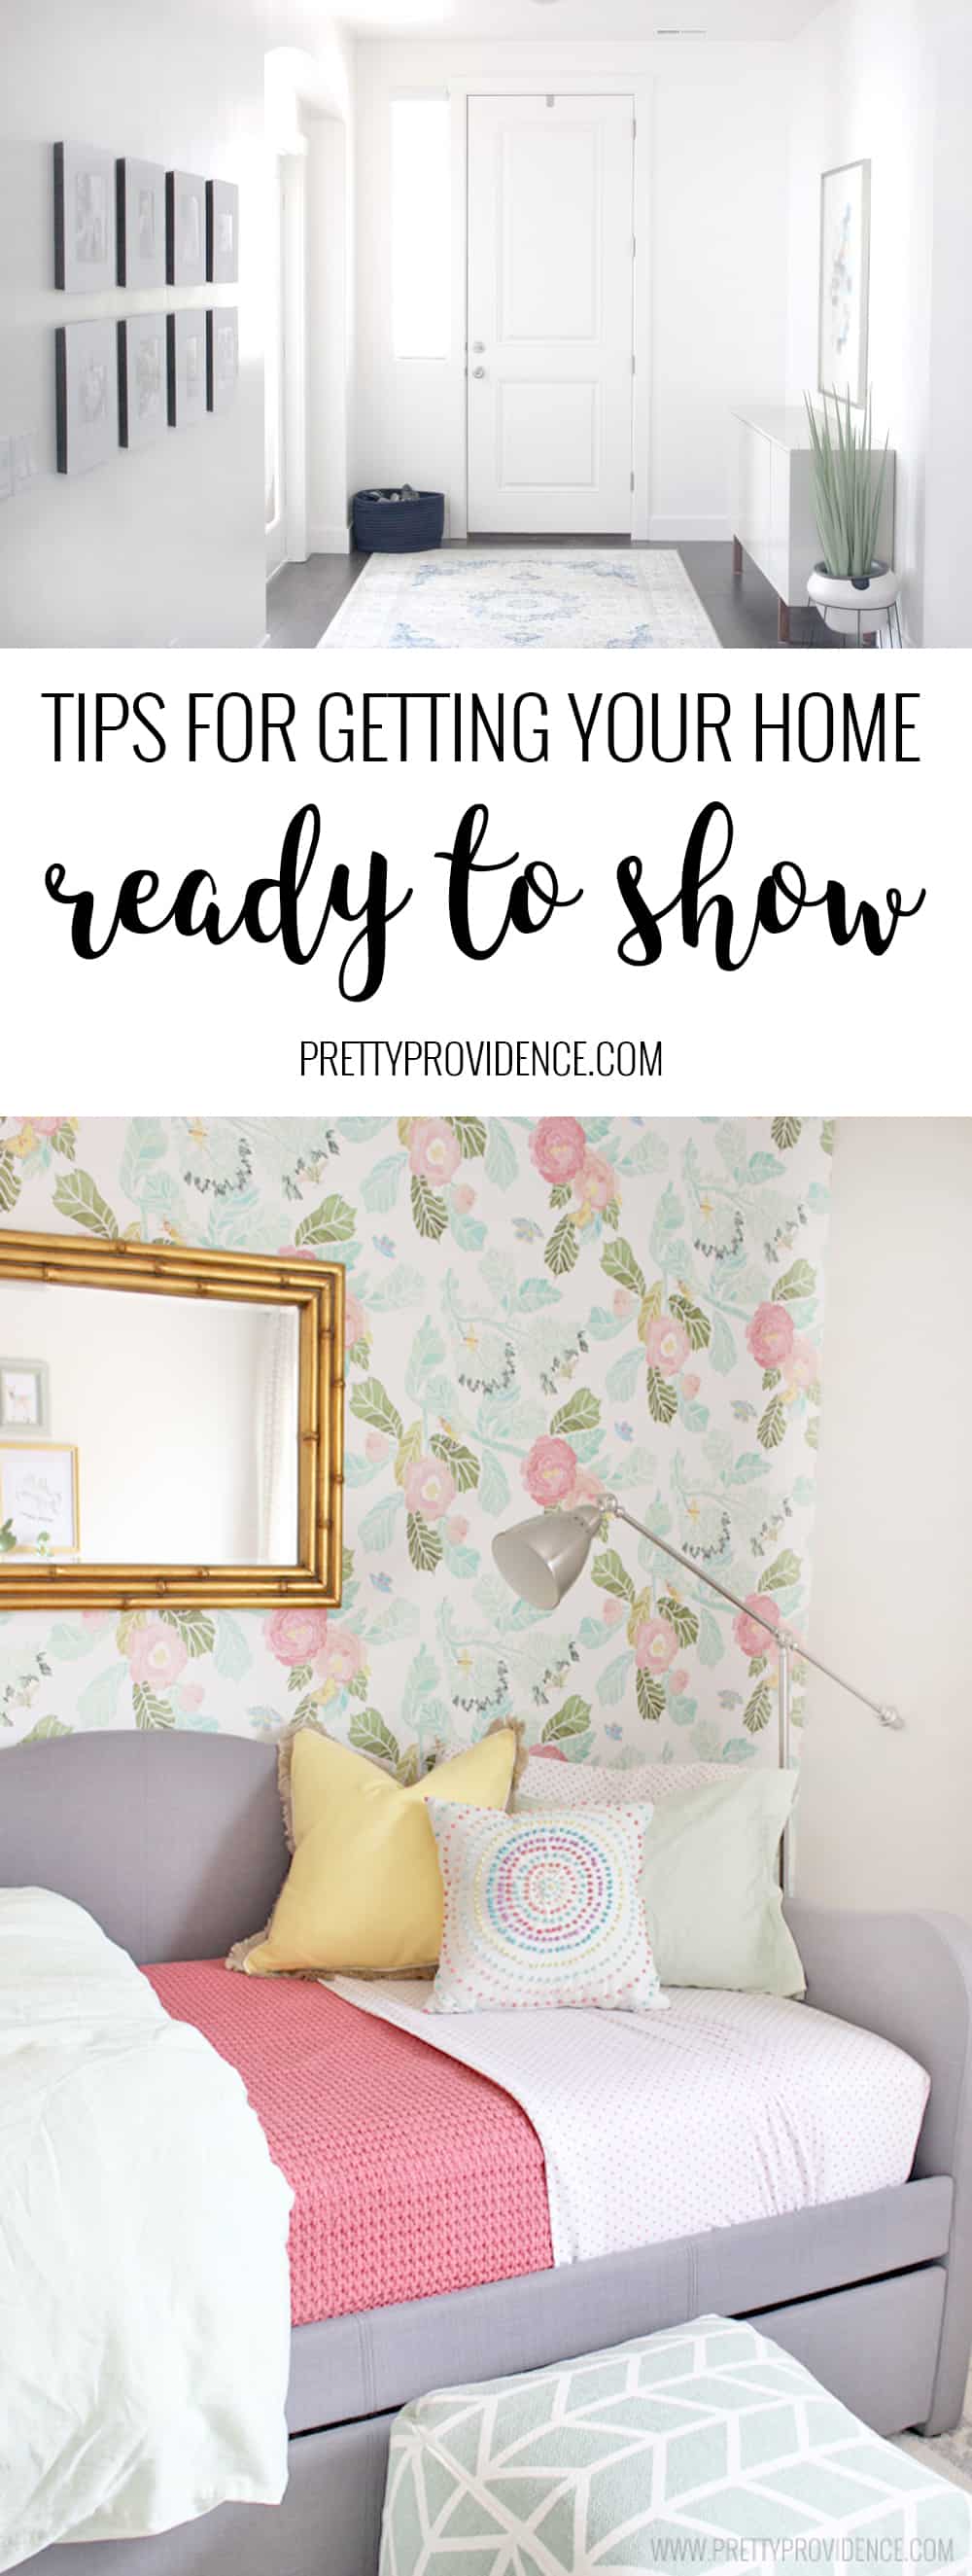 How to Get Your Home Show Ready